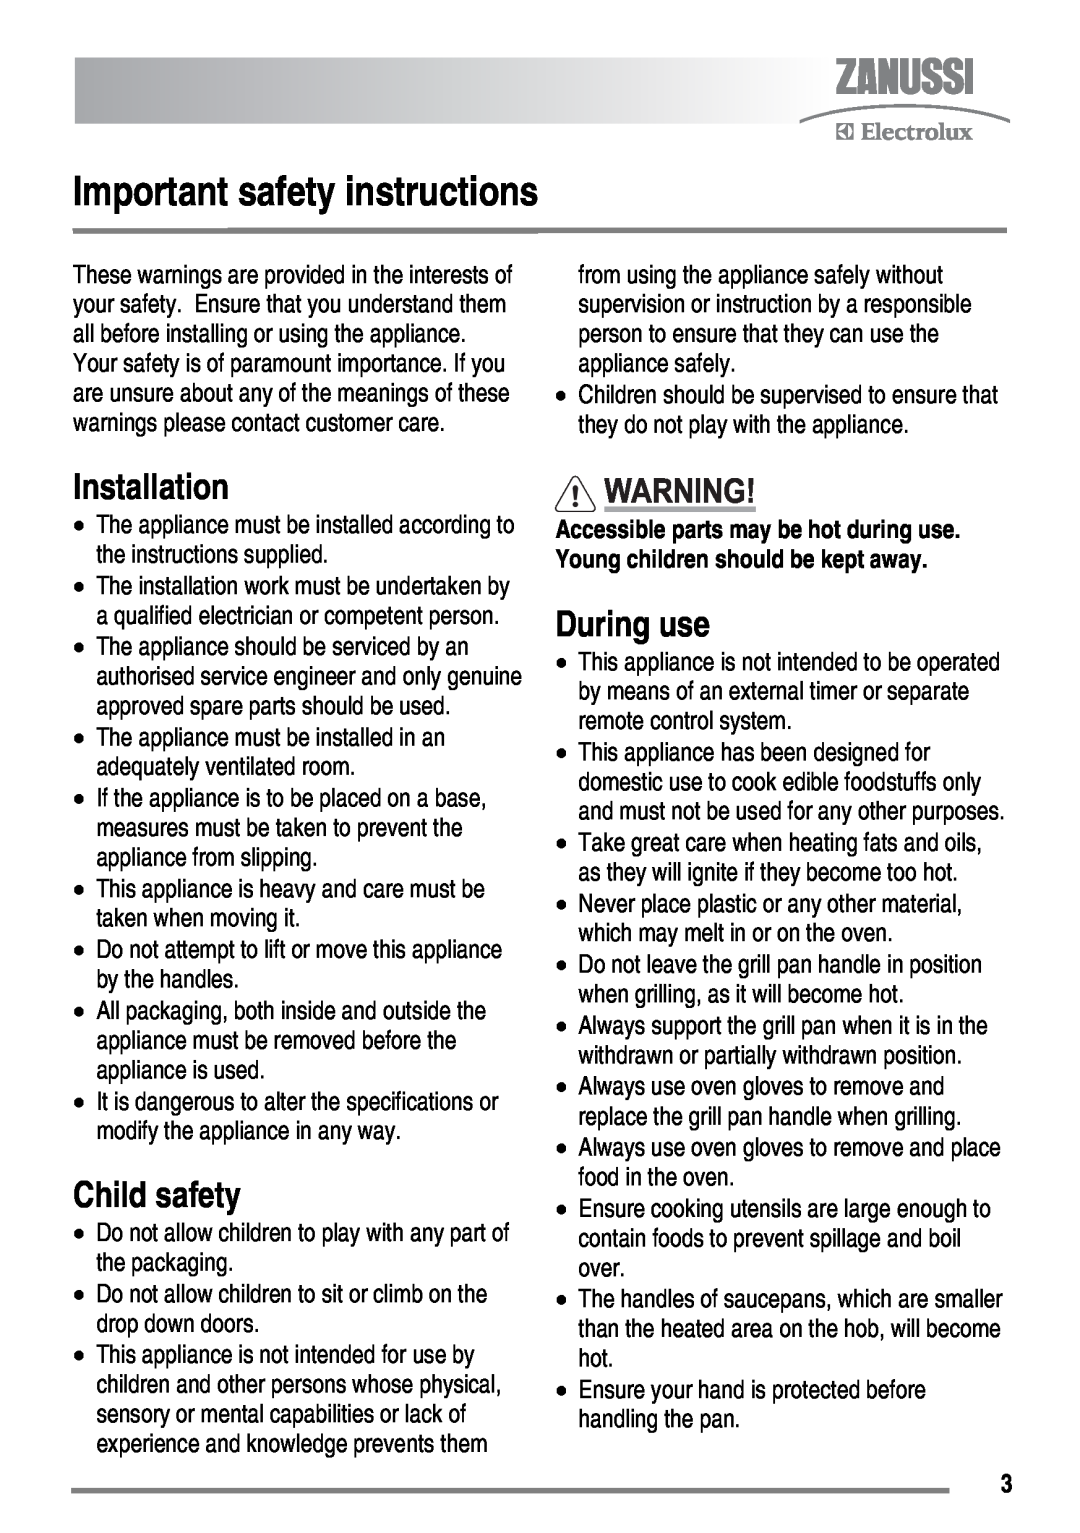 Zanussi ZKC5540 user manual Important safety instructions, Installation, Child safety, During use 